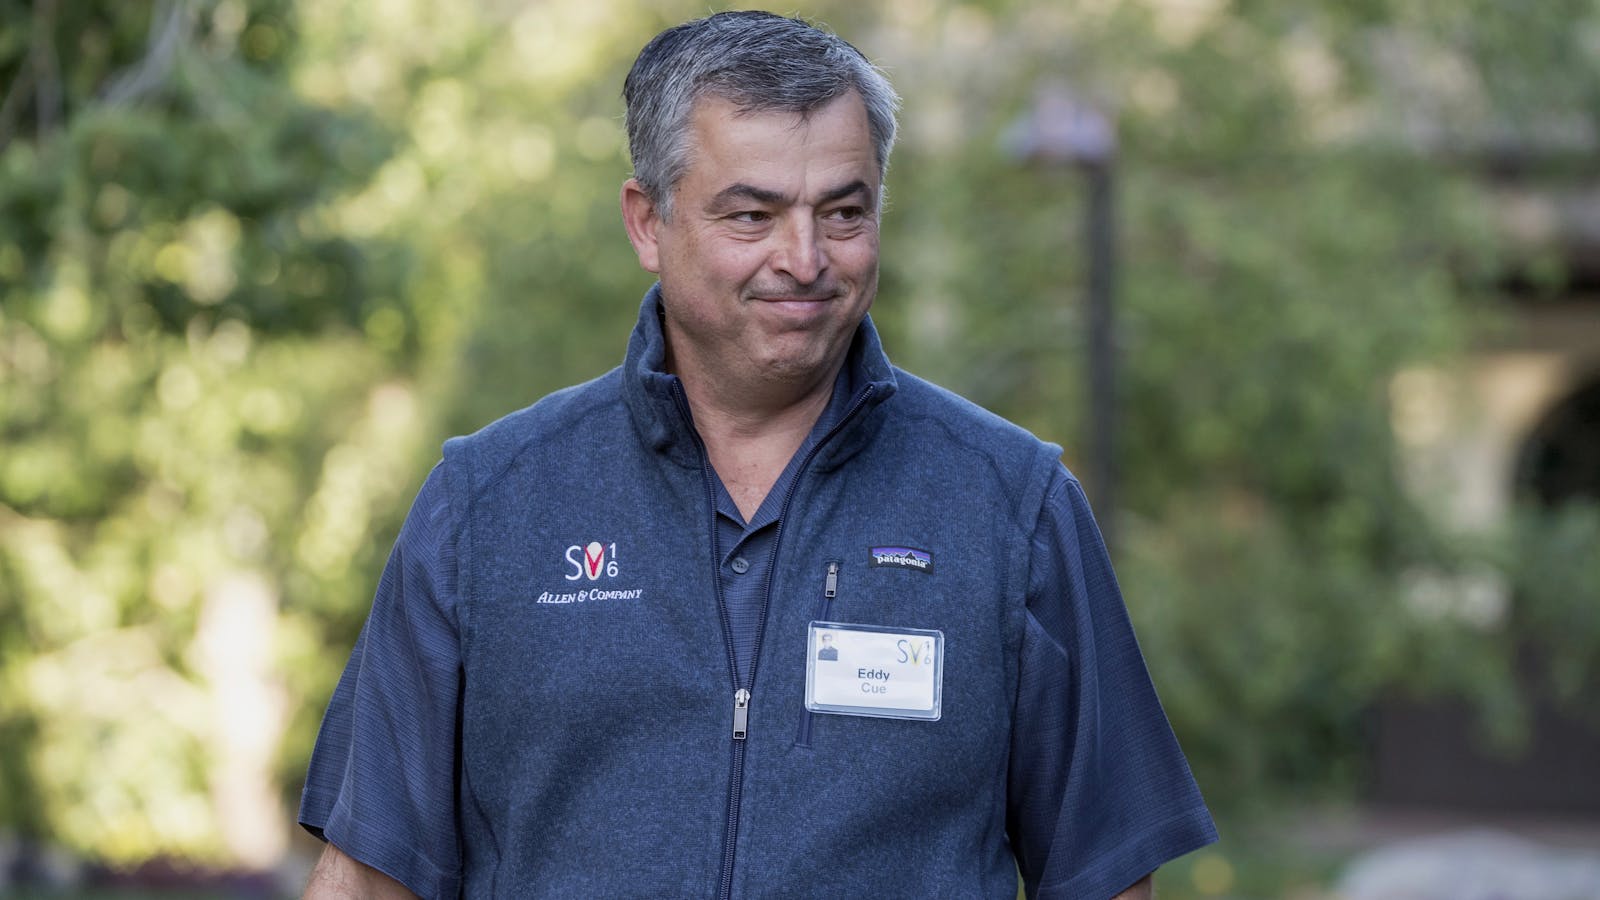 Eddy Cue, Apple’s senior vice president of Internet software and services. Photo by Bloomberg.